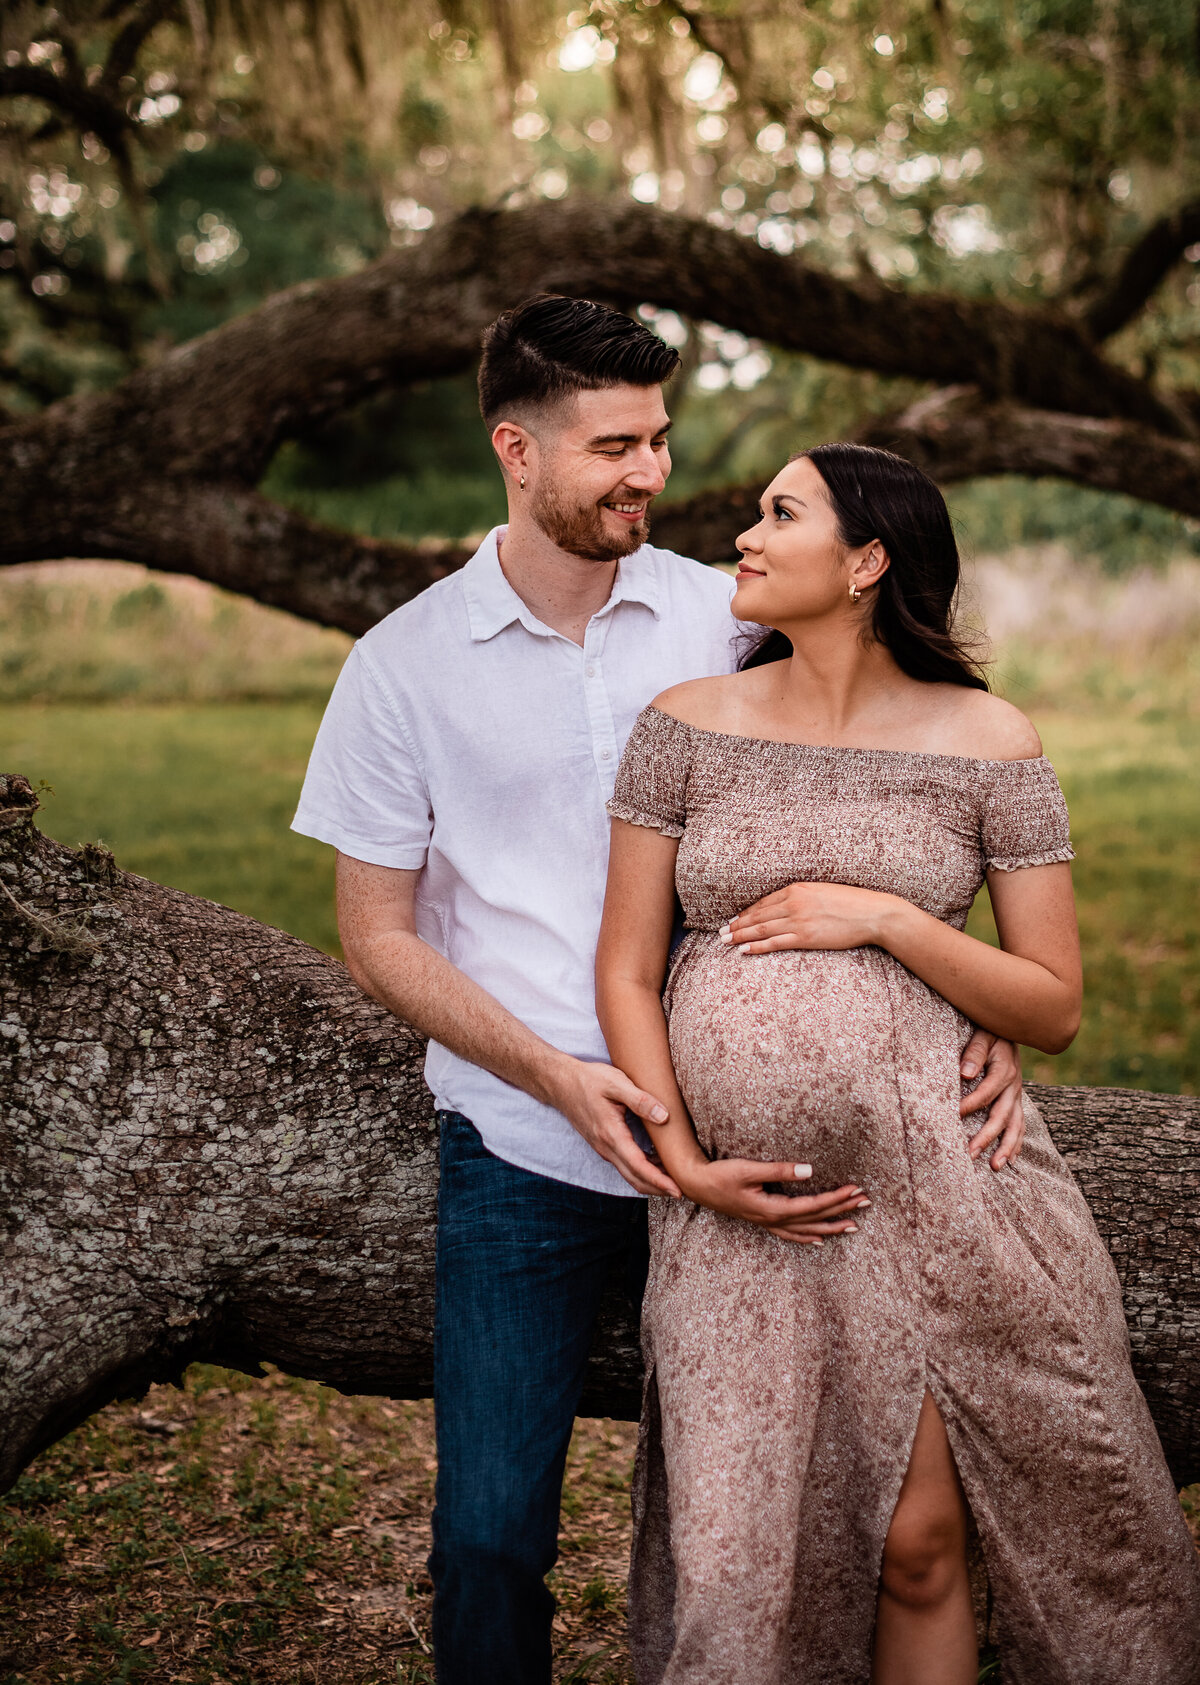 A pregnant couple leans on a low oak tree branch while looking at each other.